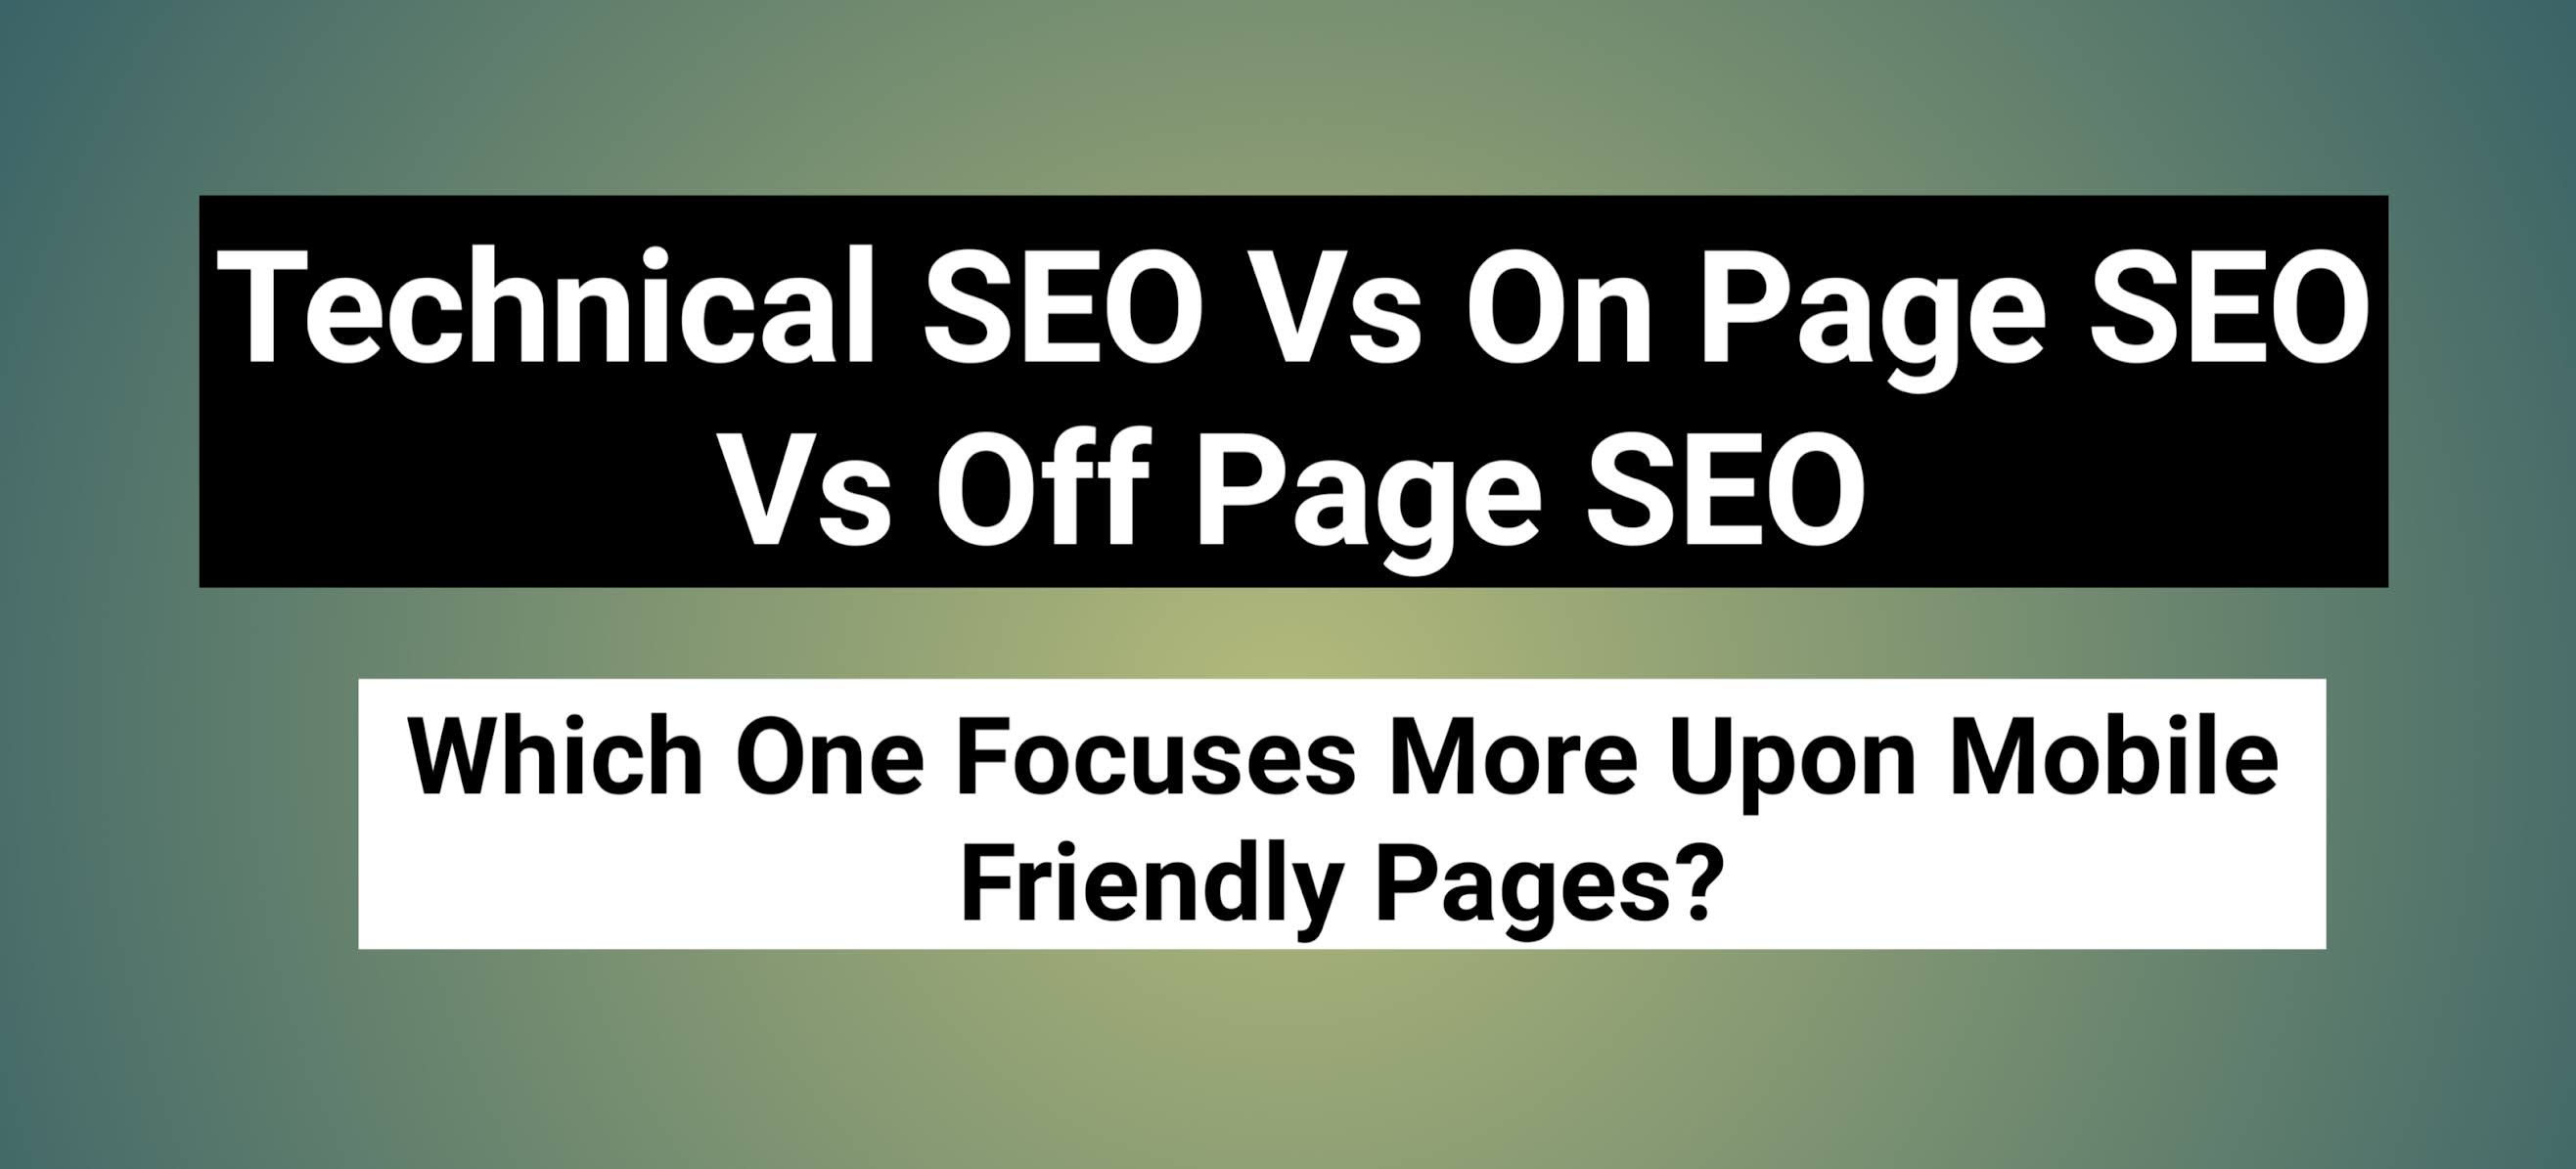 Technical SEO Vs On Page SEO Vs Off Page SEO - Which One Focuses More Upon Mobile Friendly Pages?